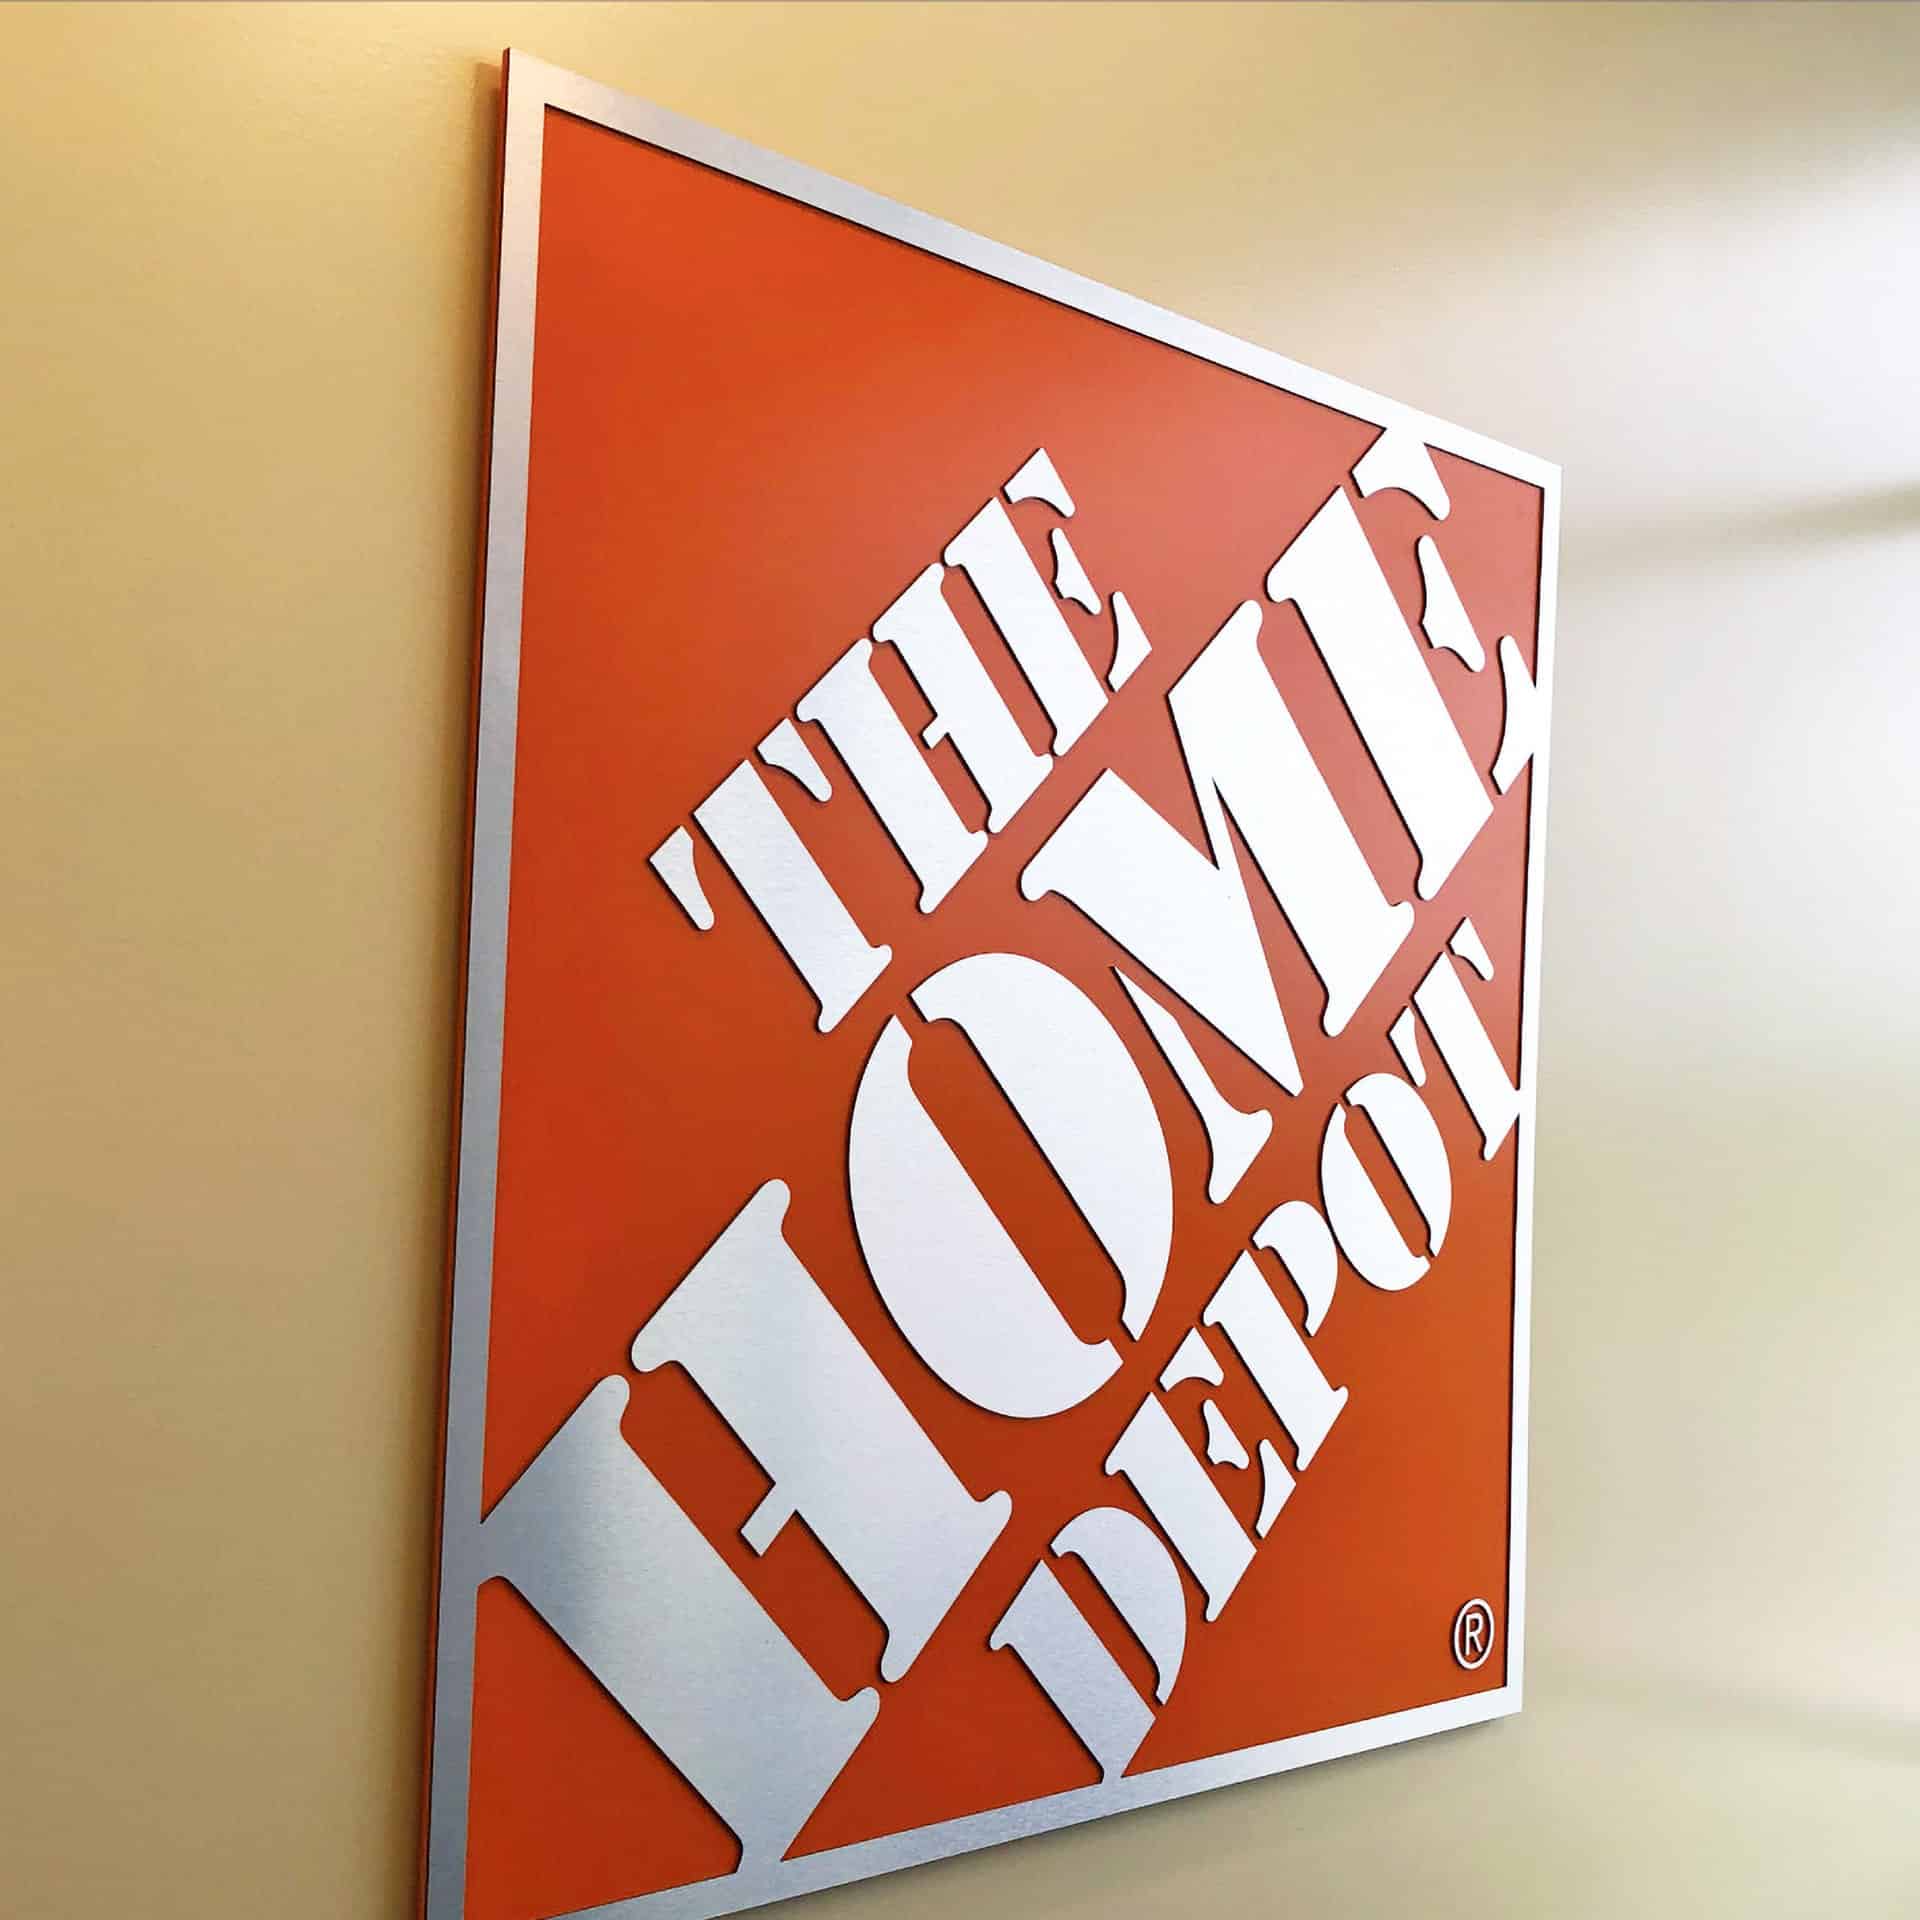 The Home Depot logo sign is hanging on the wall.